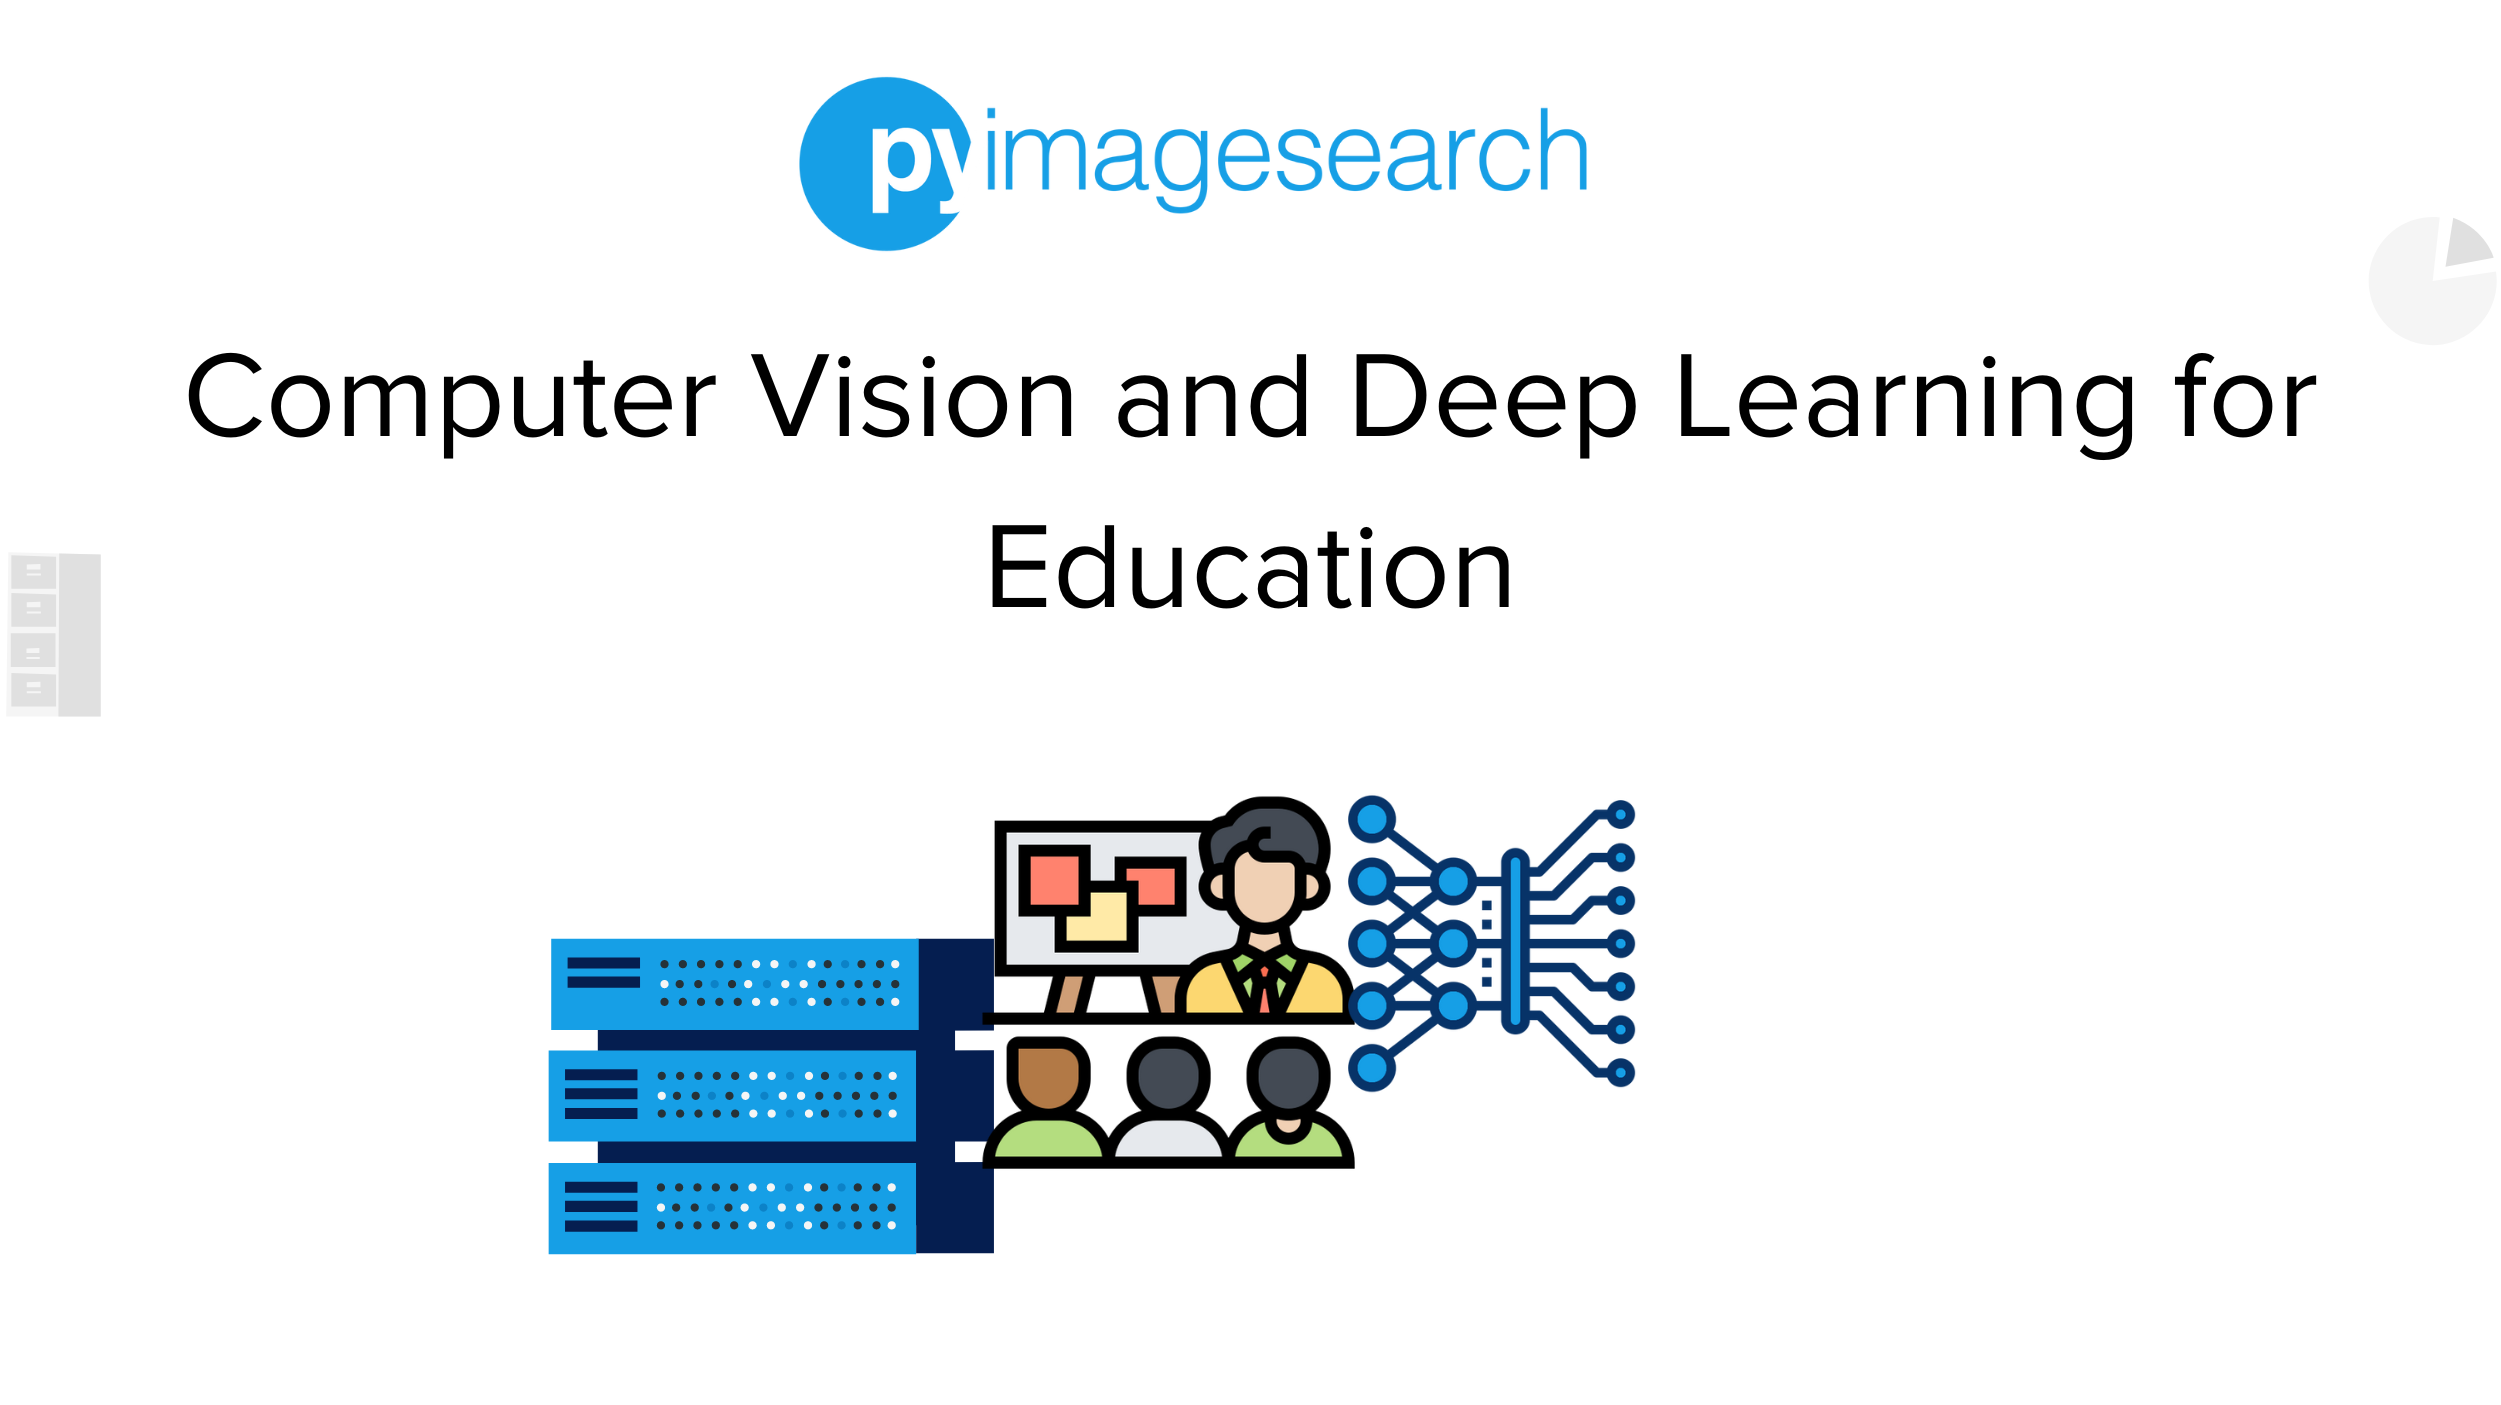 Computer Vision and Deep Learning for Education